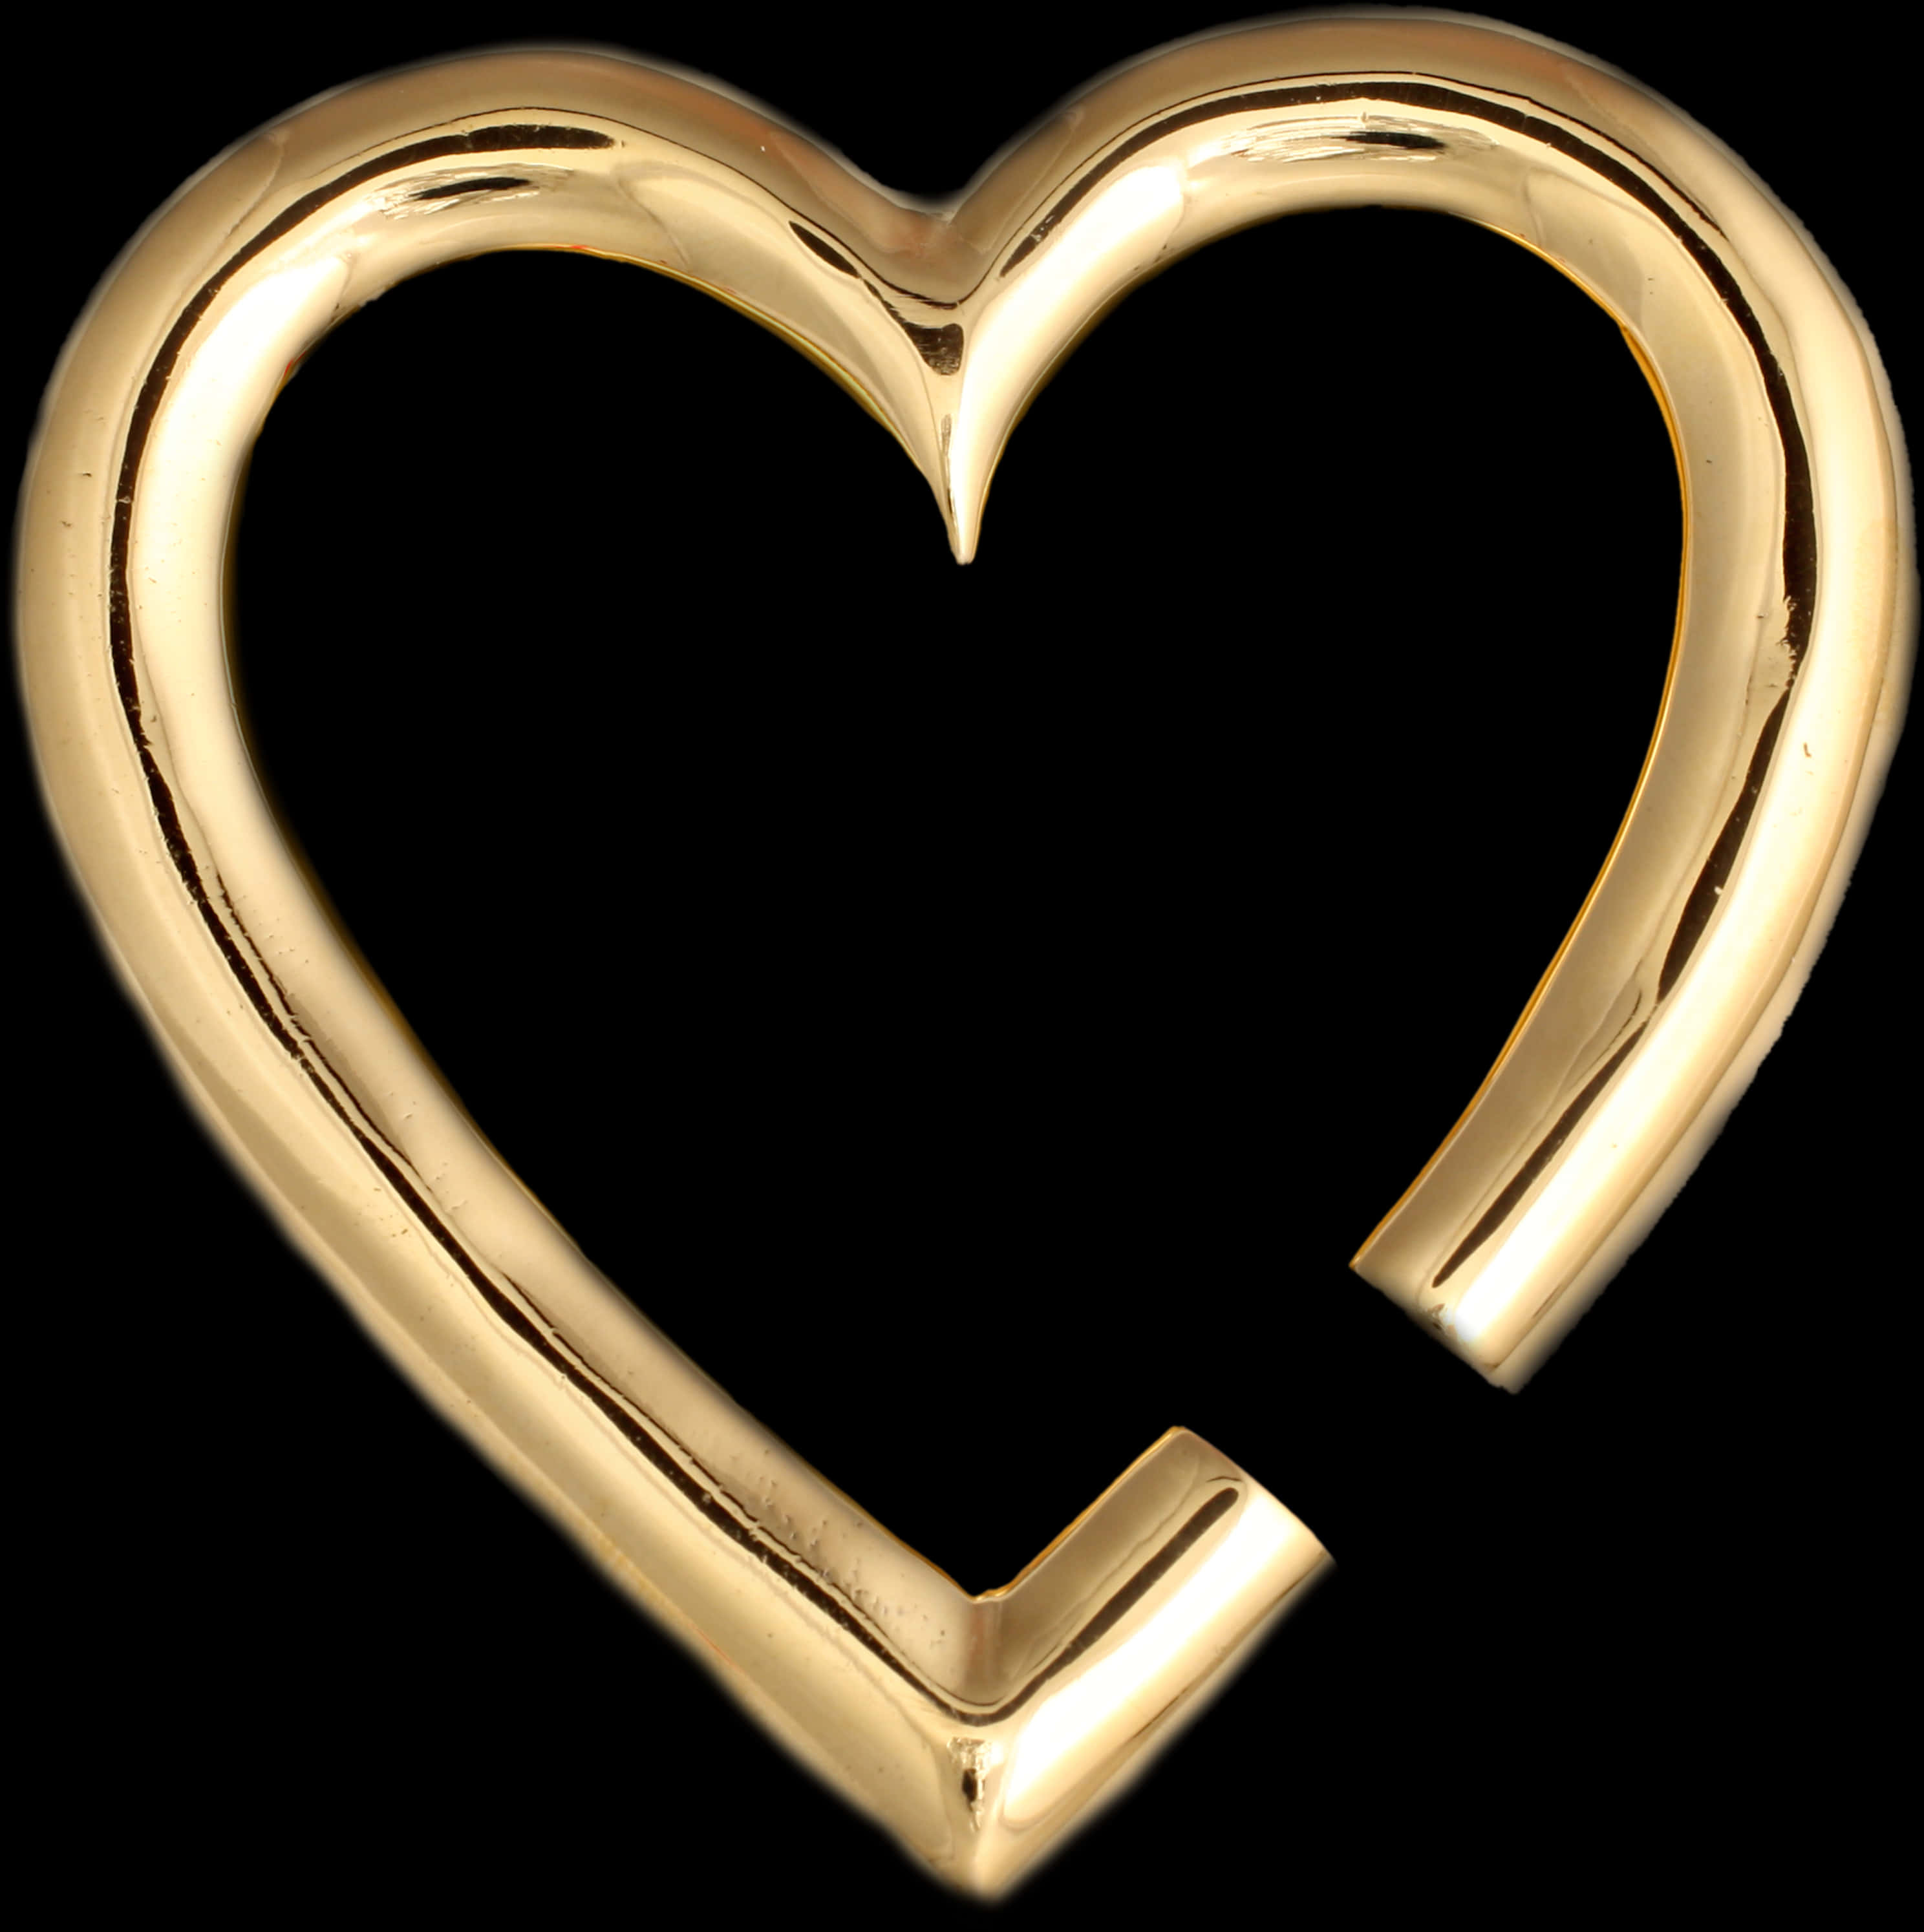 A Gold Heart Shaped Object